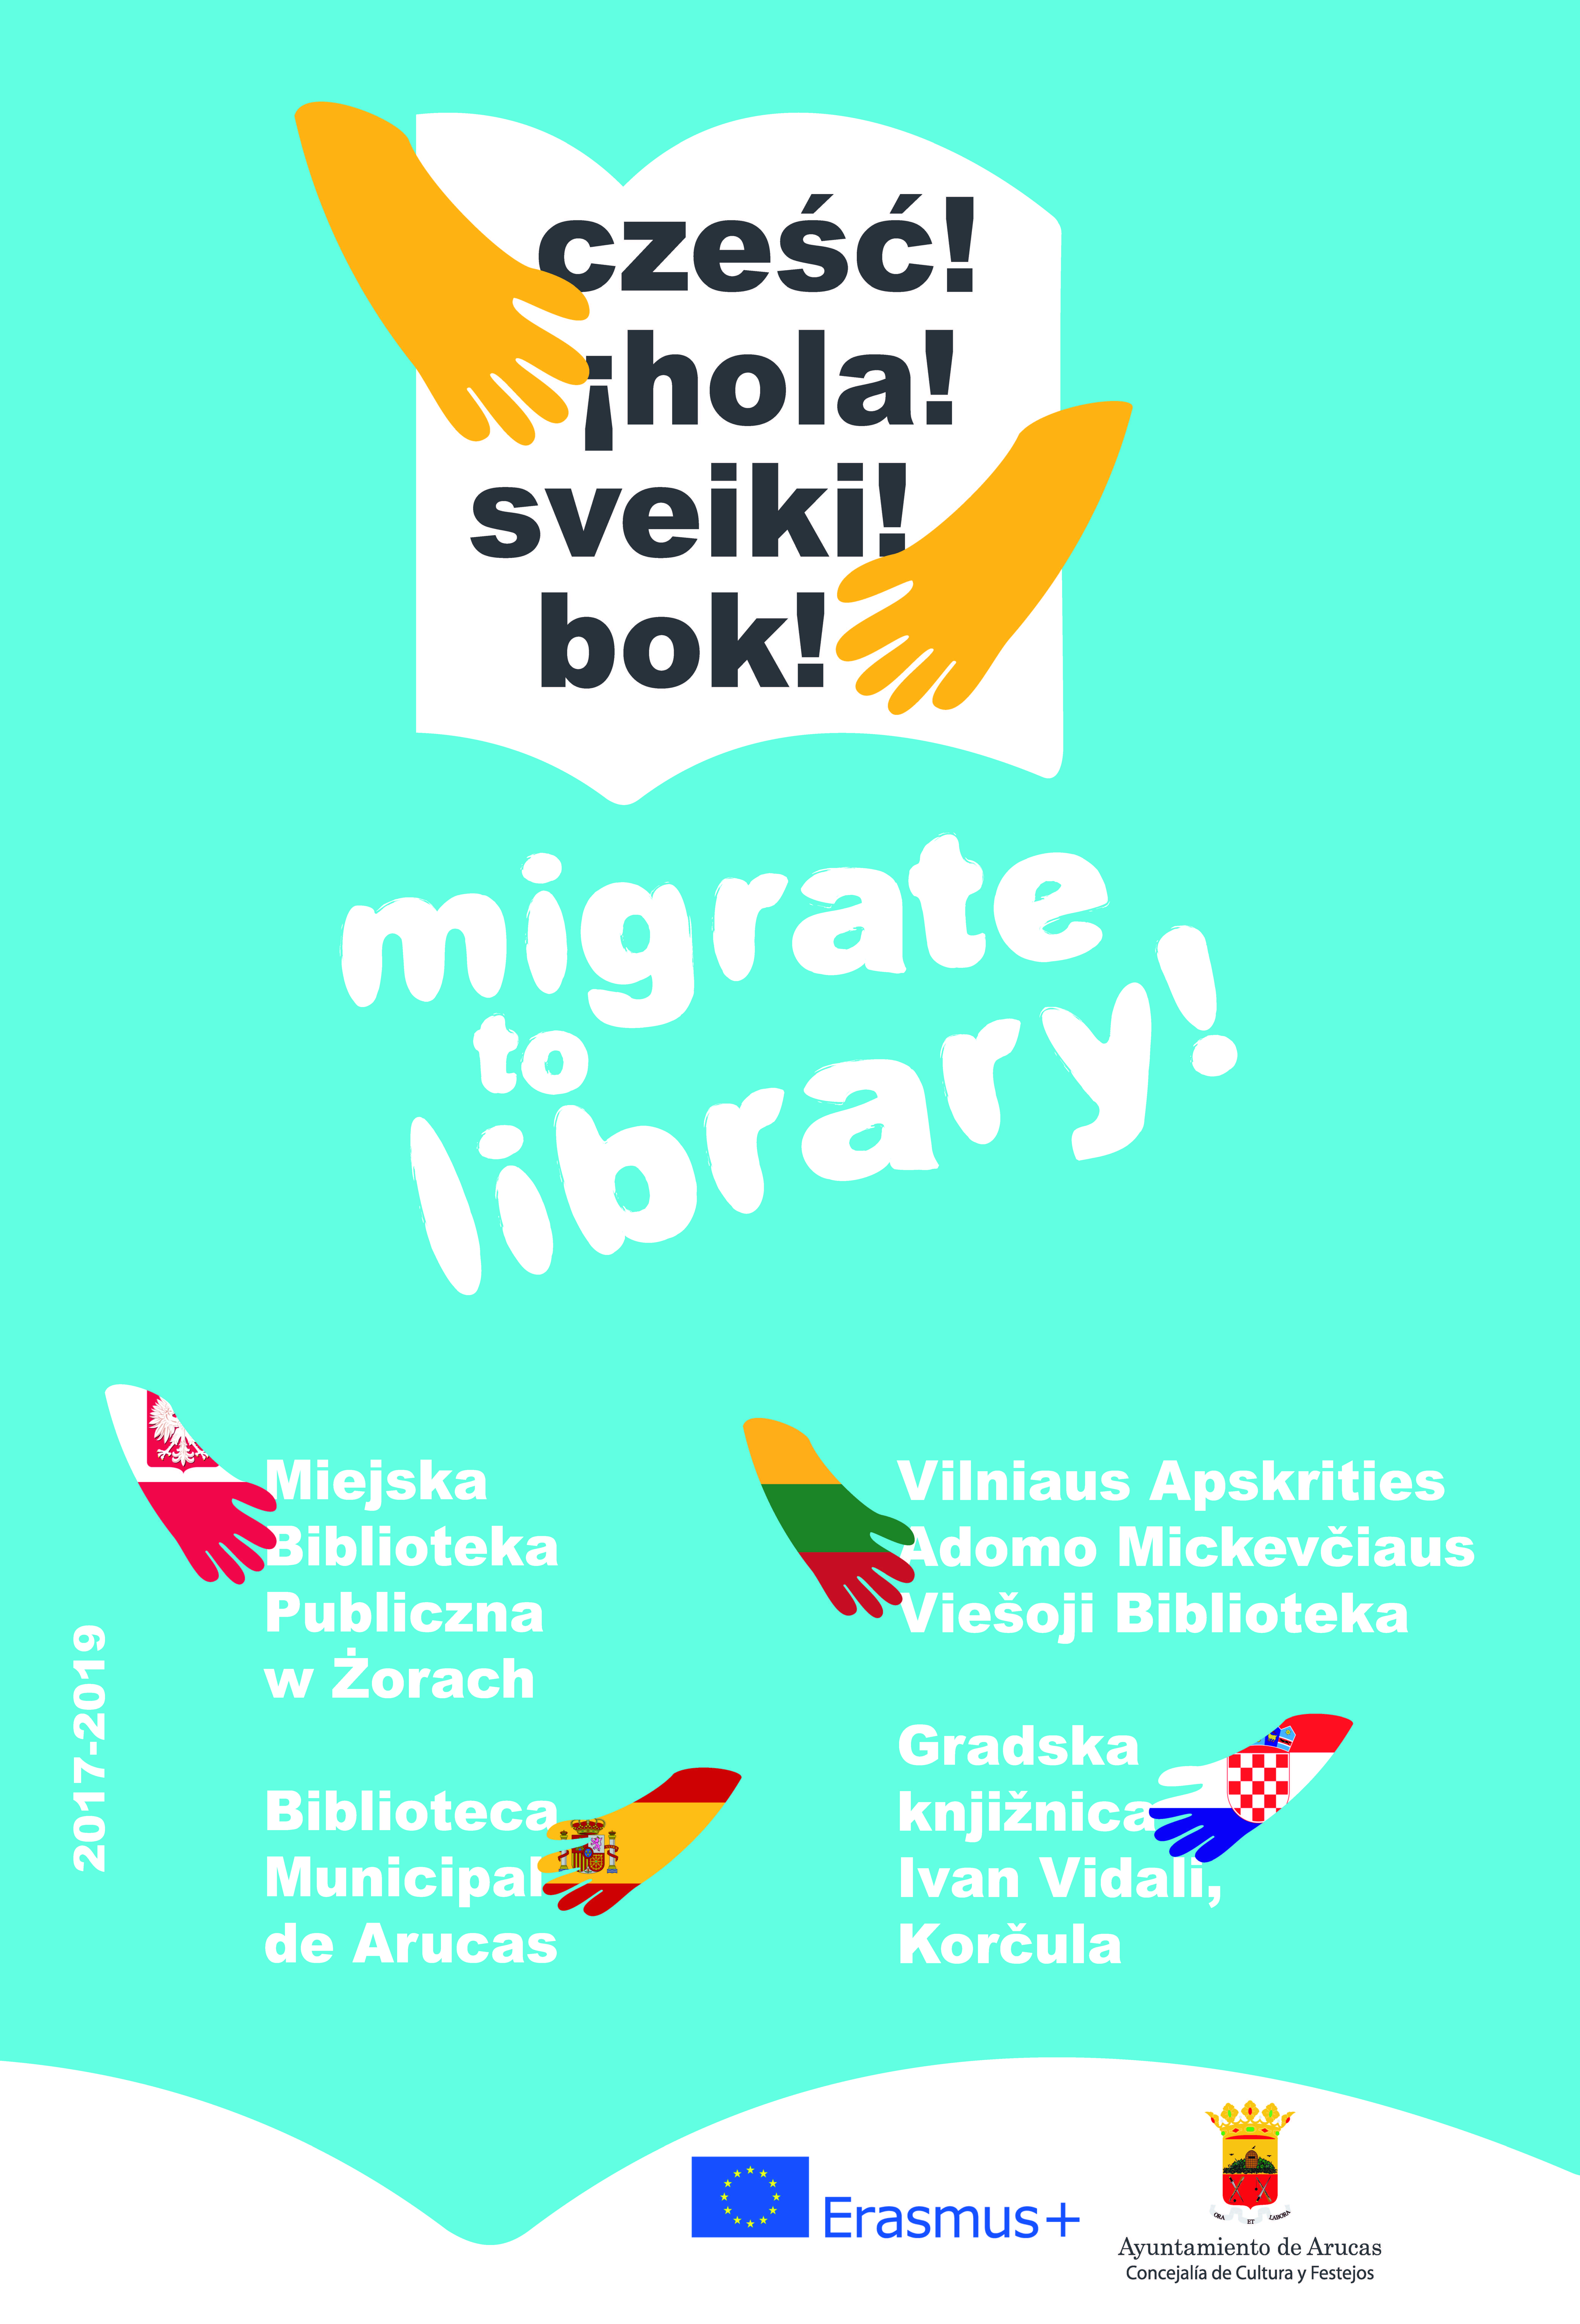 MIGRATE TO LIBRARY! (2017-2019)